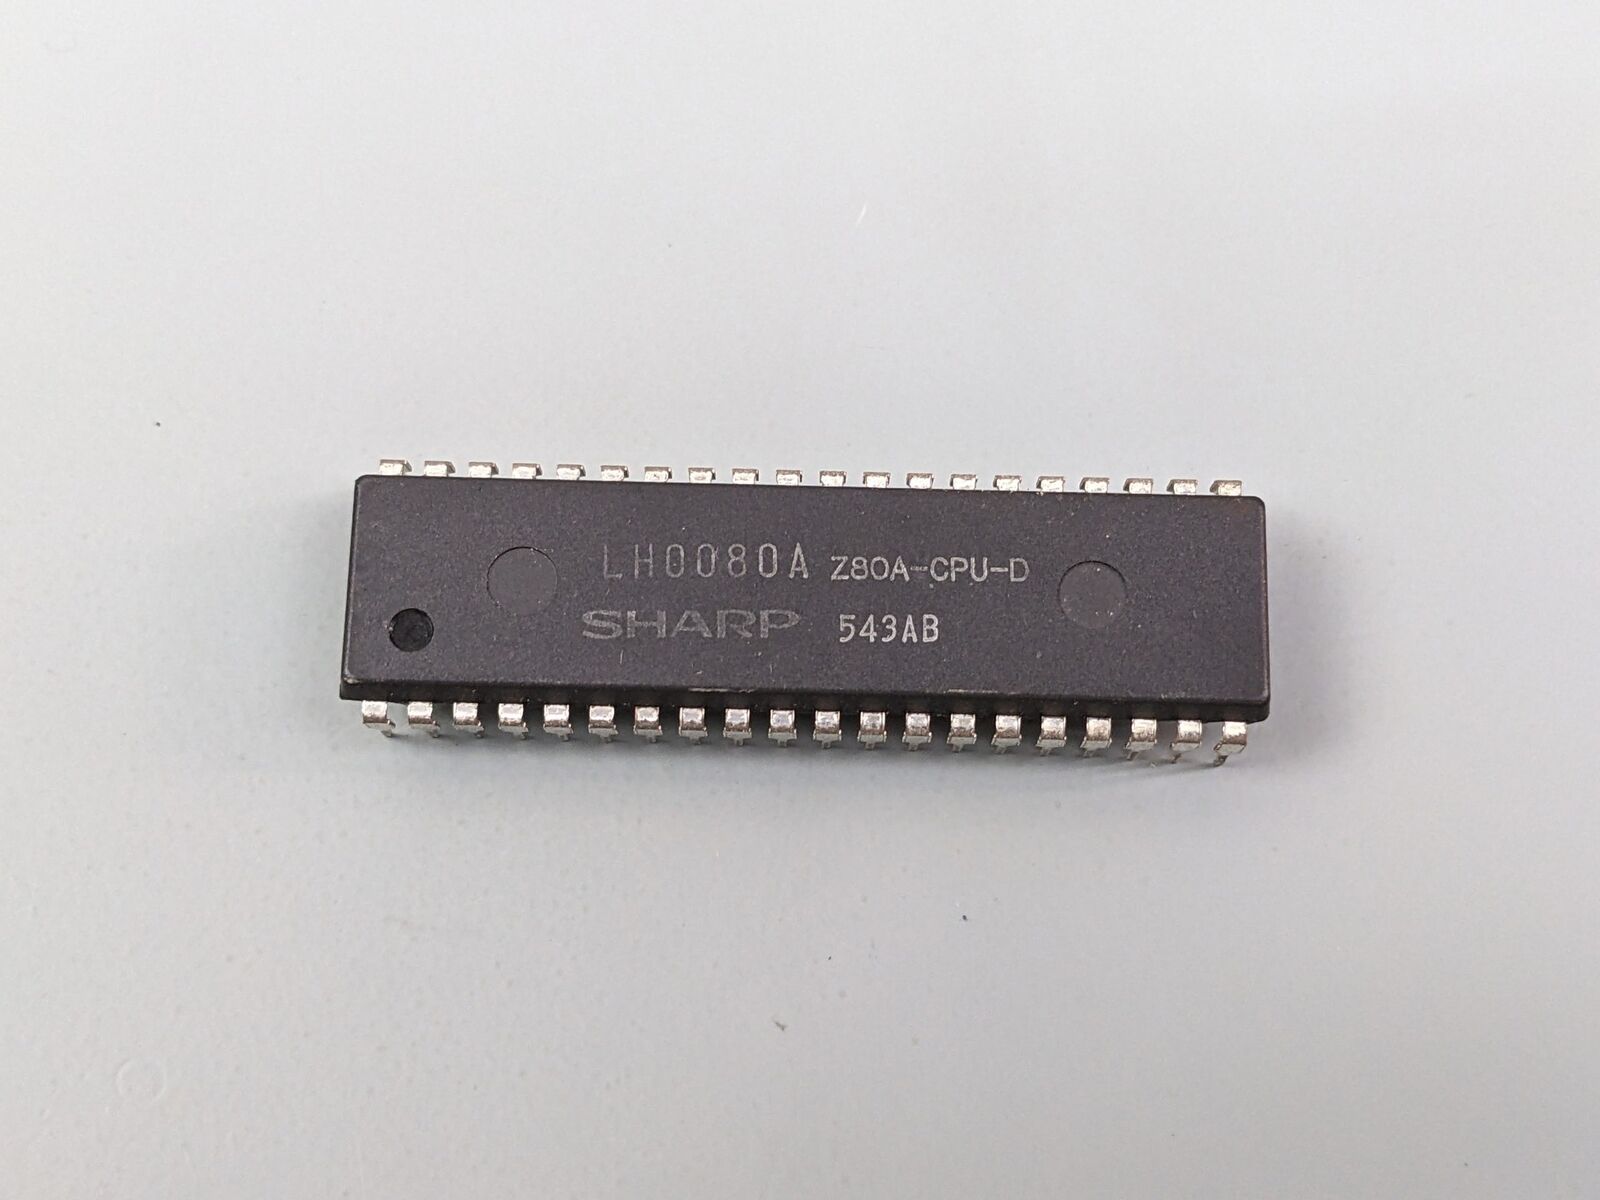 NOS Sharp Z80A CPU, LH0080A (4MHz Zilog Z80A) for Vintage PC, CP/M ~ US STOCK